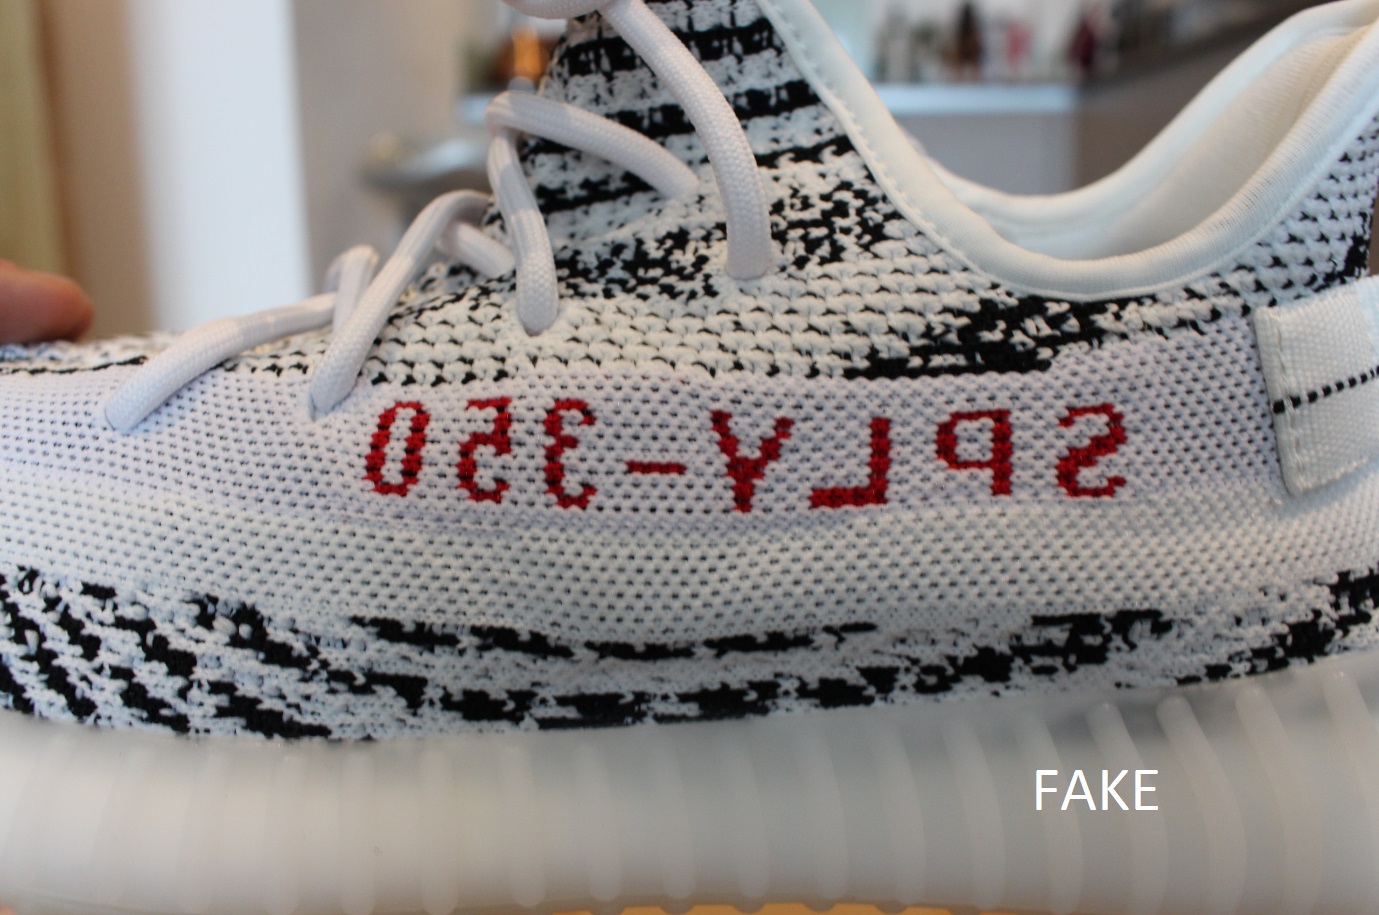 How to spot Fake Yeezy Boost 350 Zebras - Kingsdown Roots